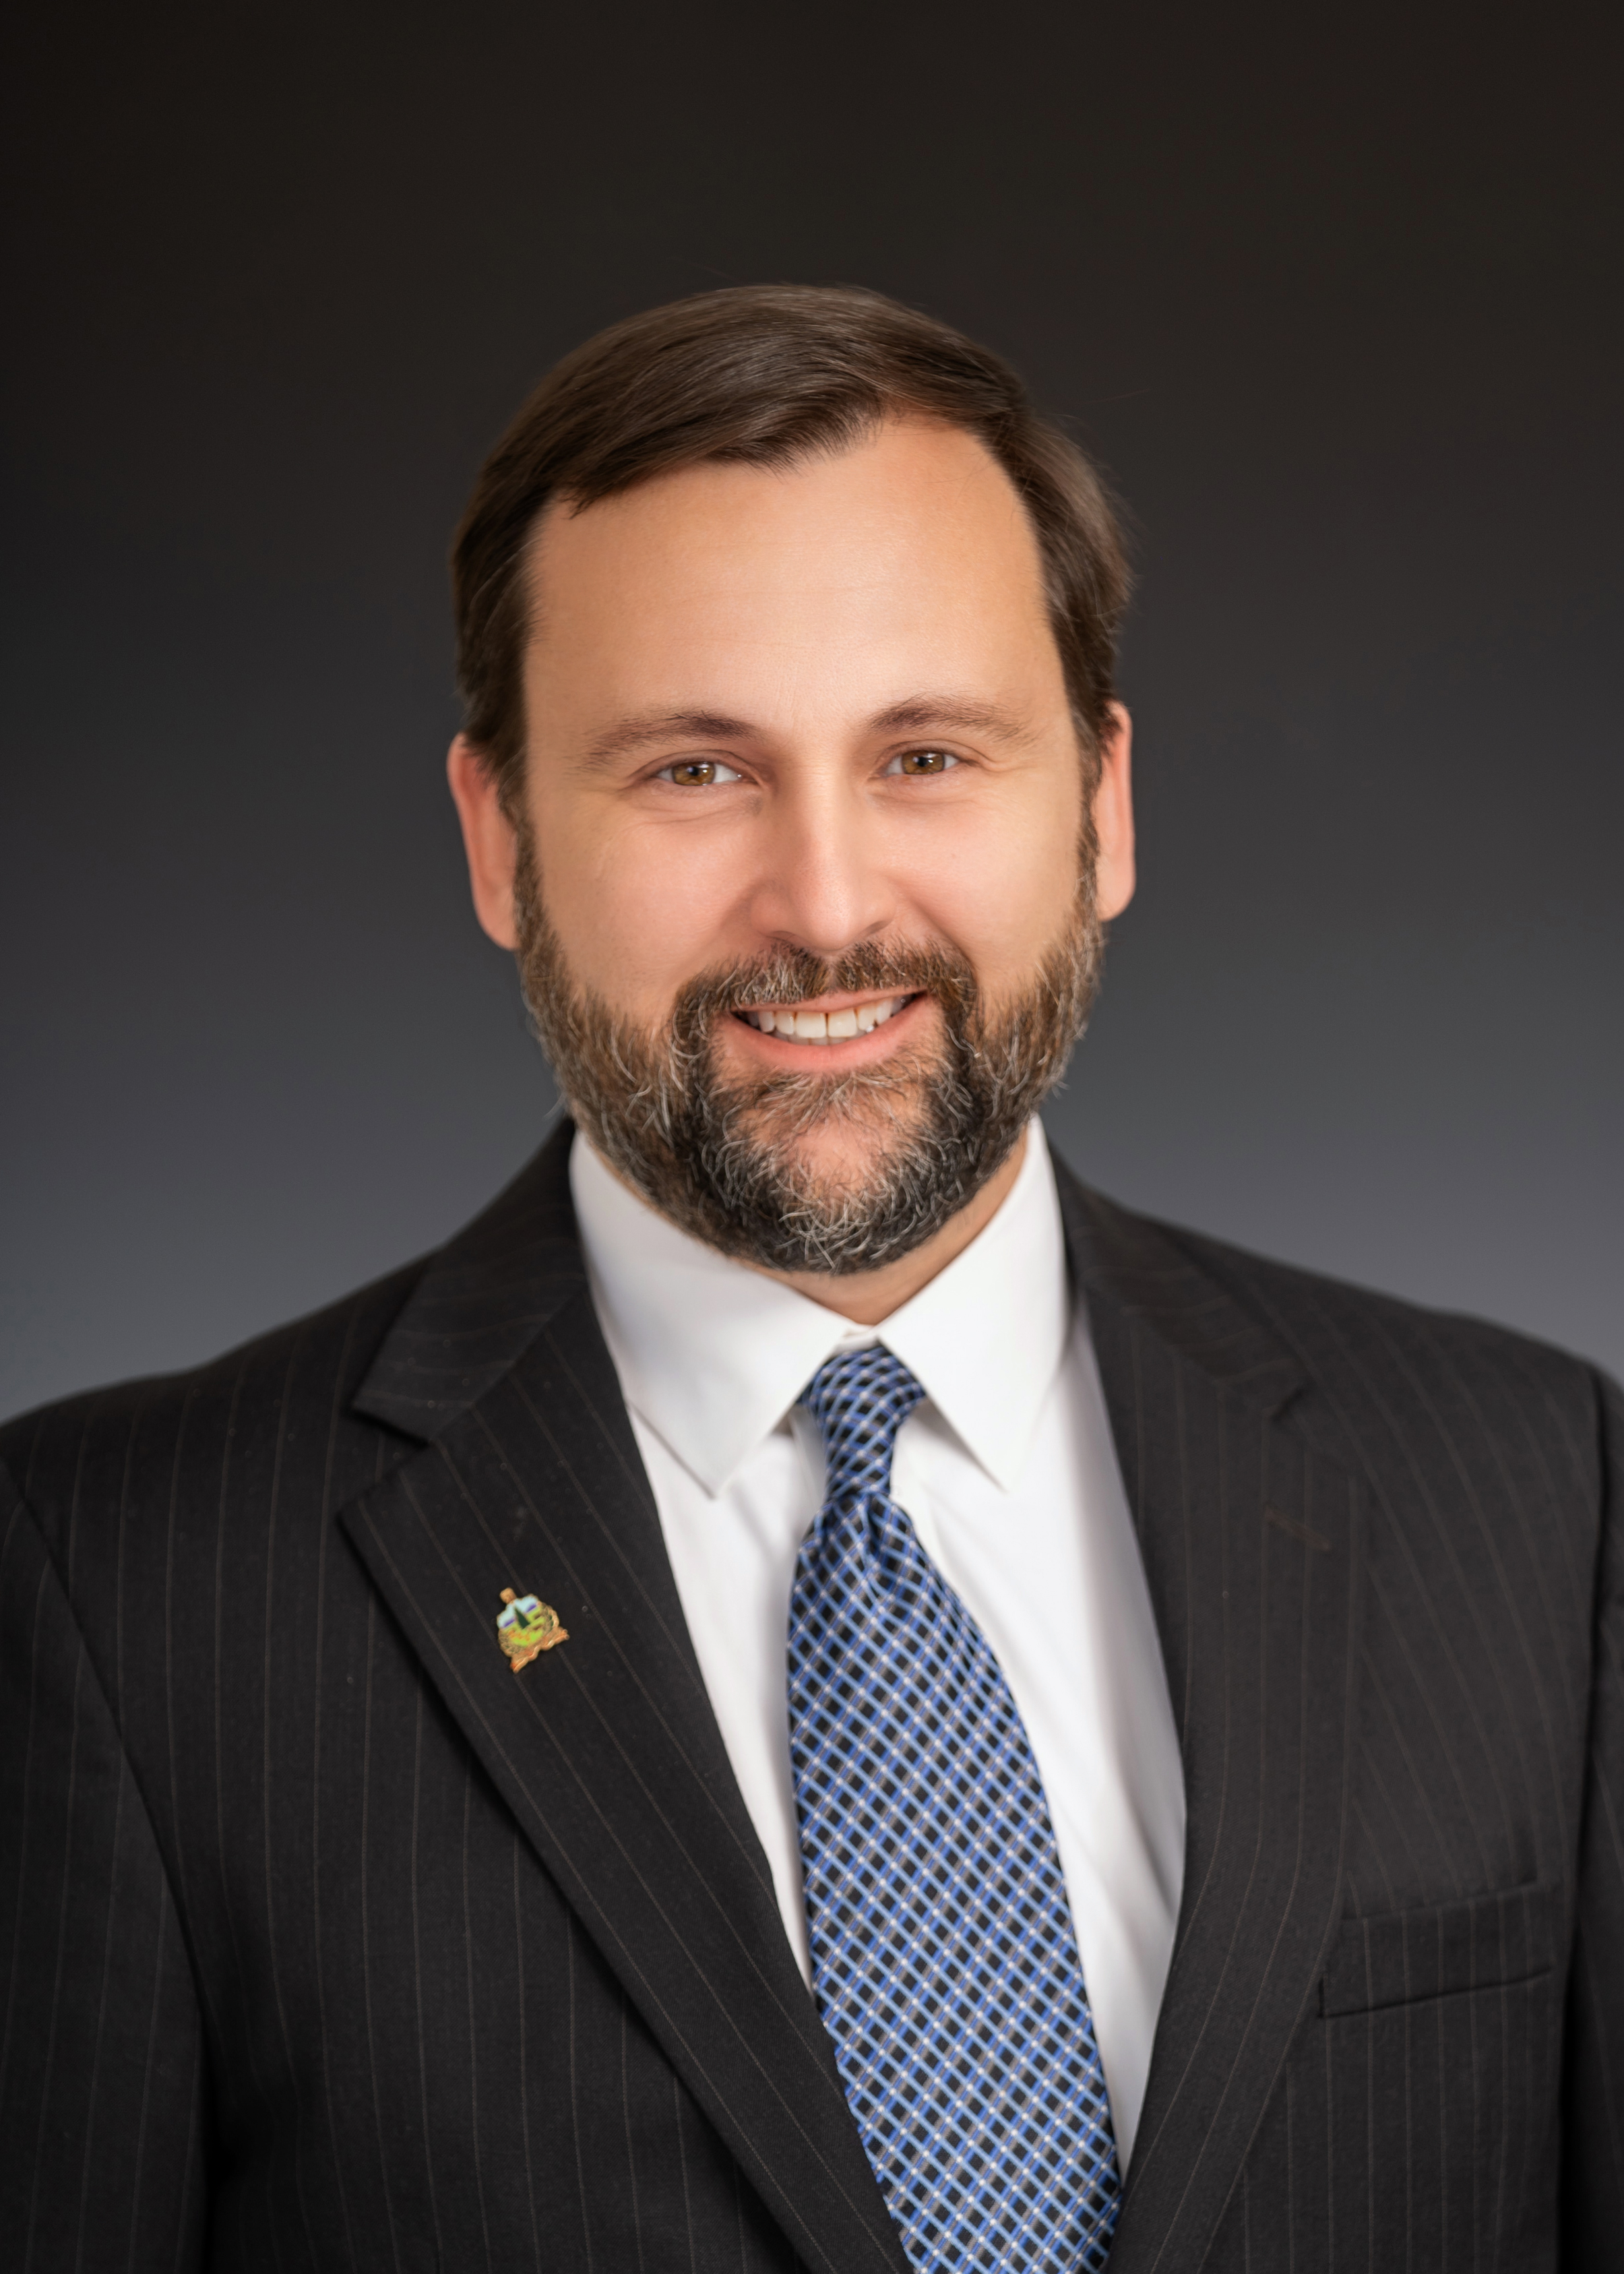 White male with dark hair and beard in black suit, white shirt and medium blue tie